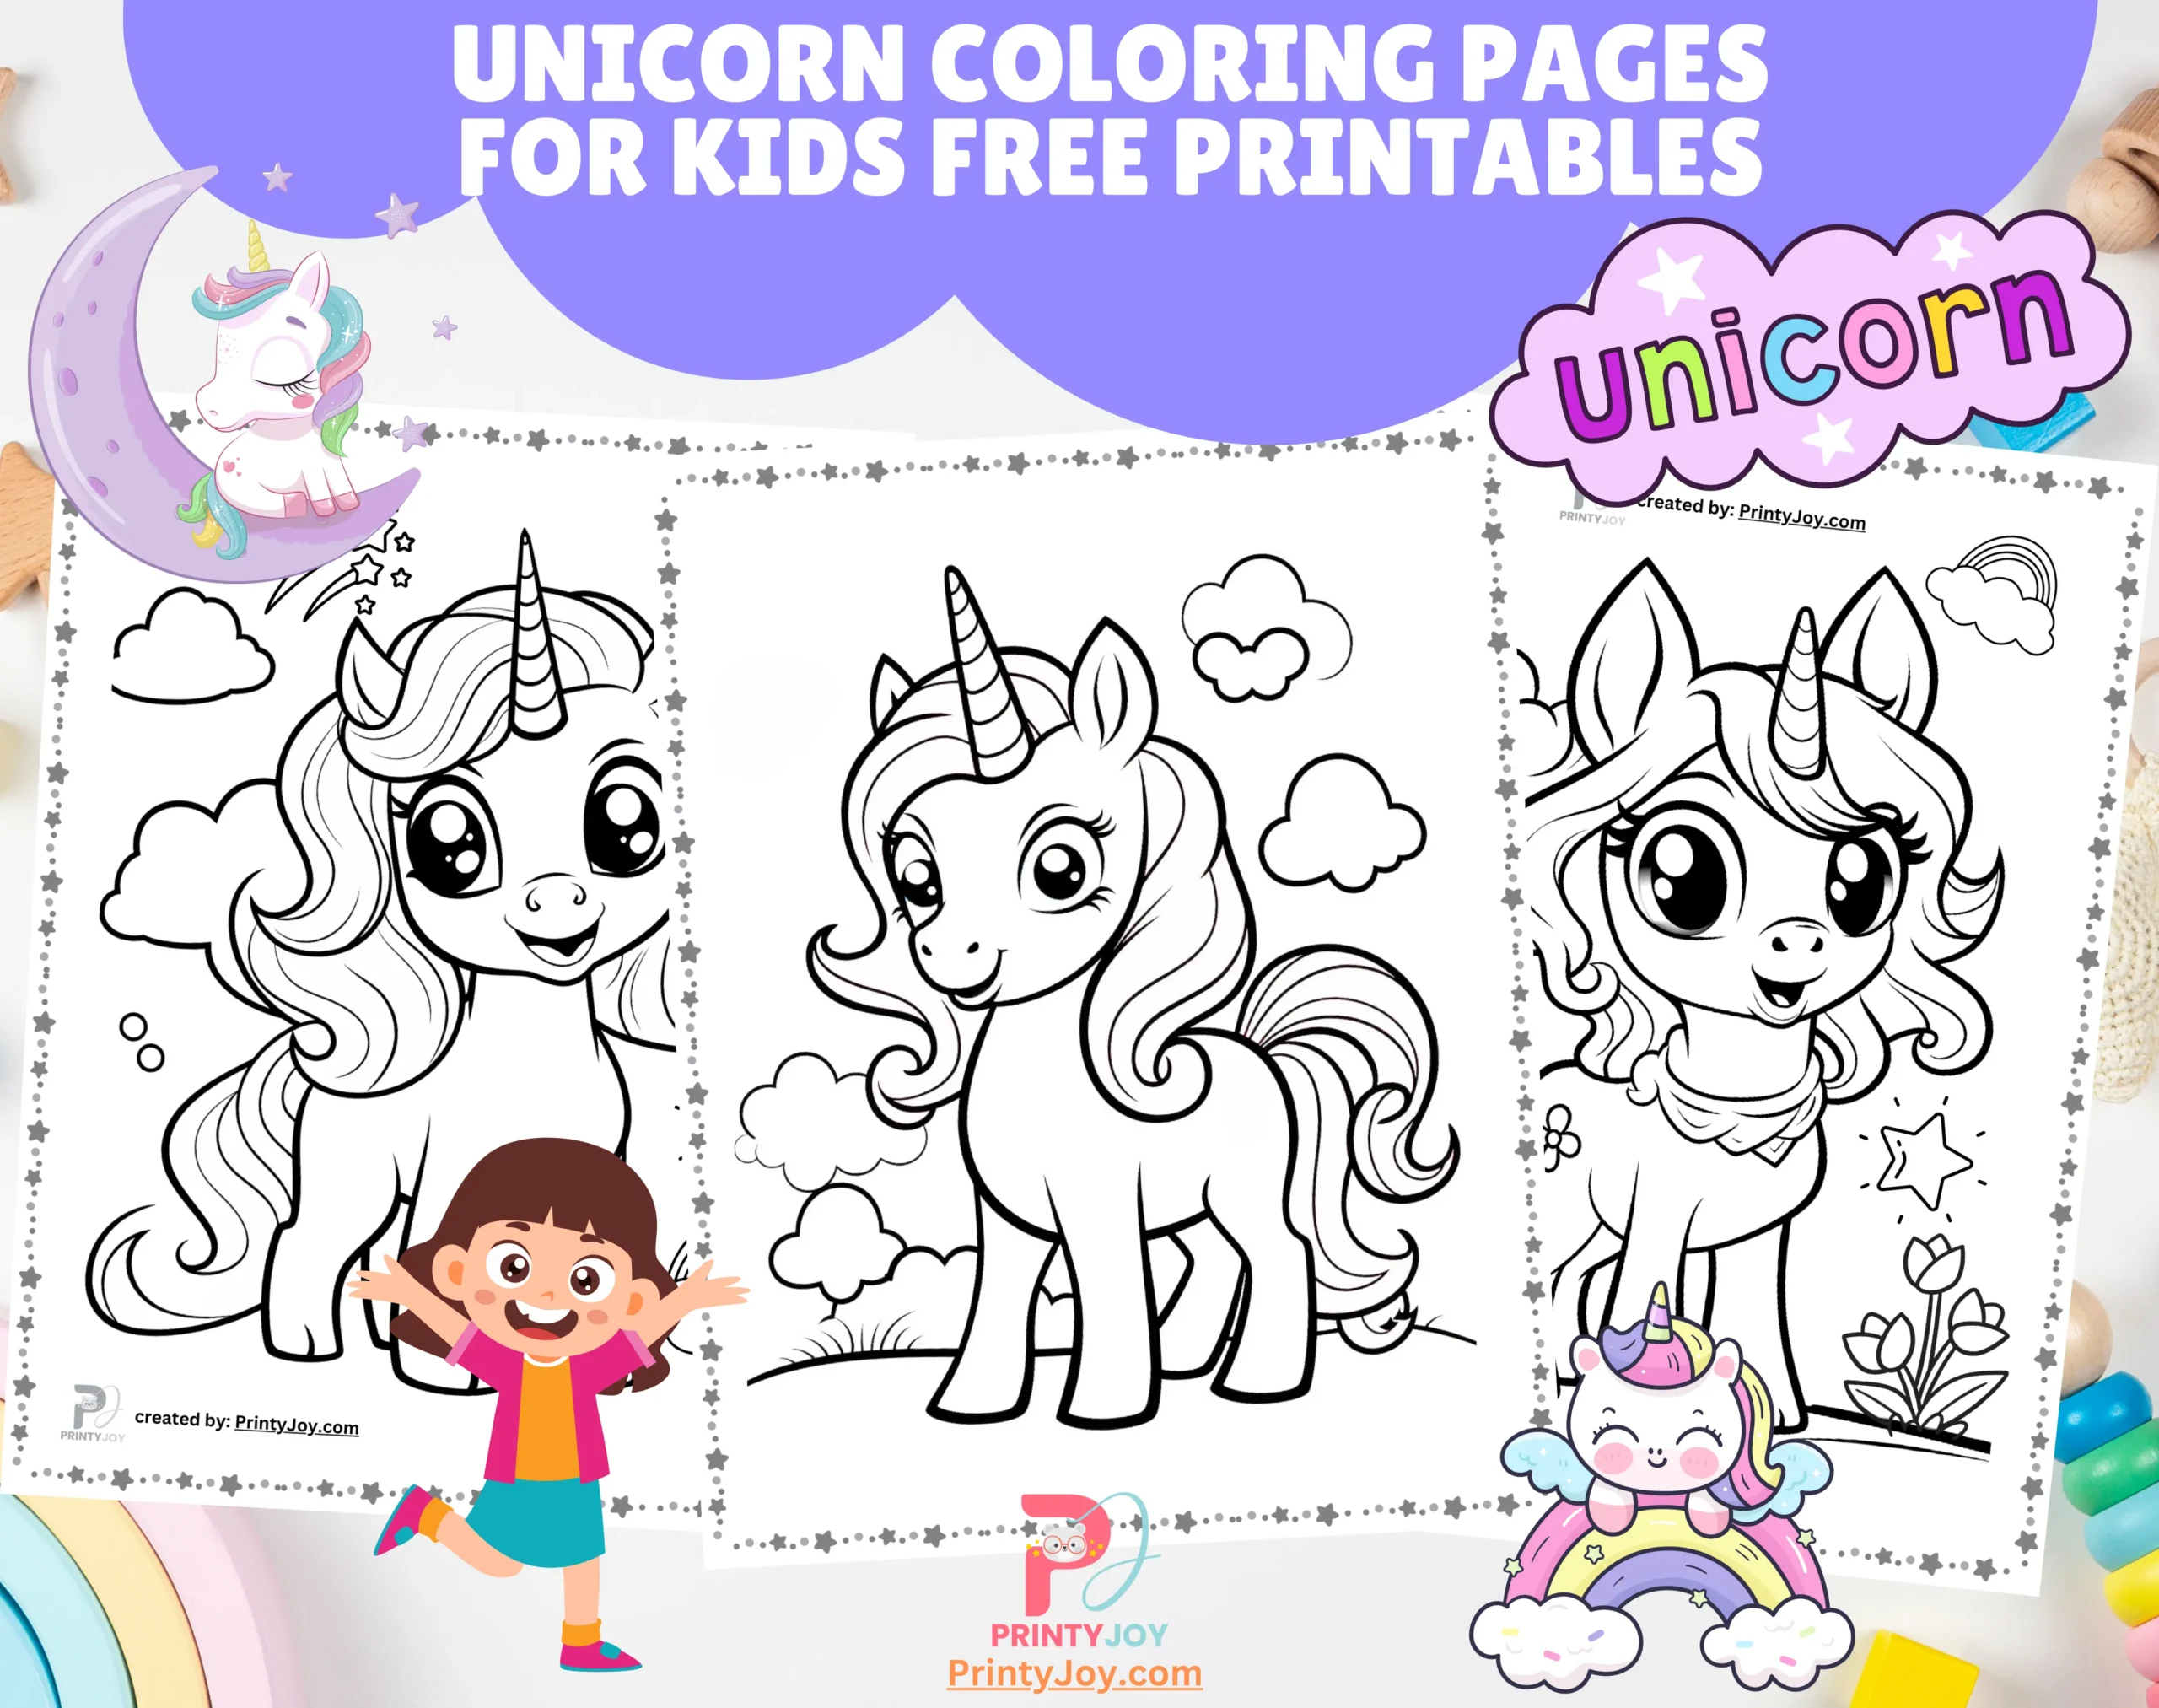 Unicorn Coloring Pages for Kids Free Printables